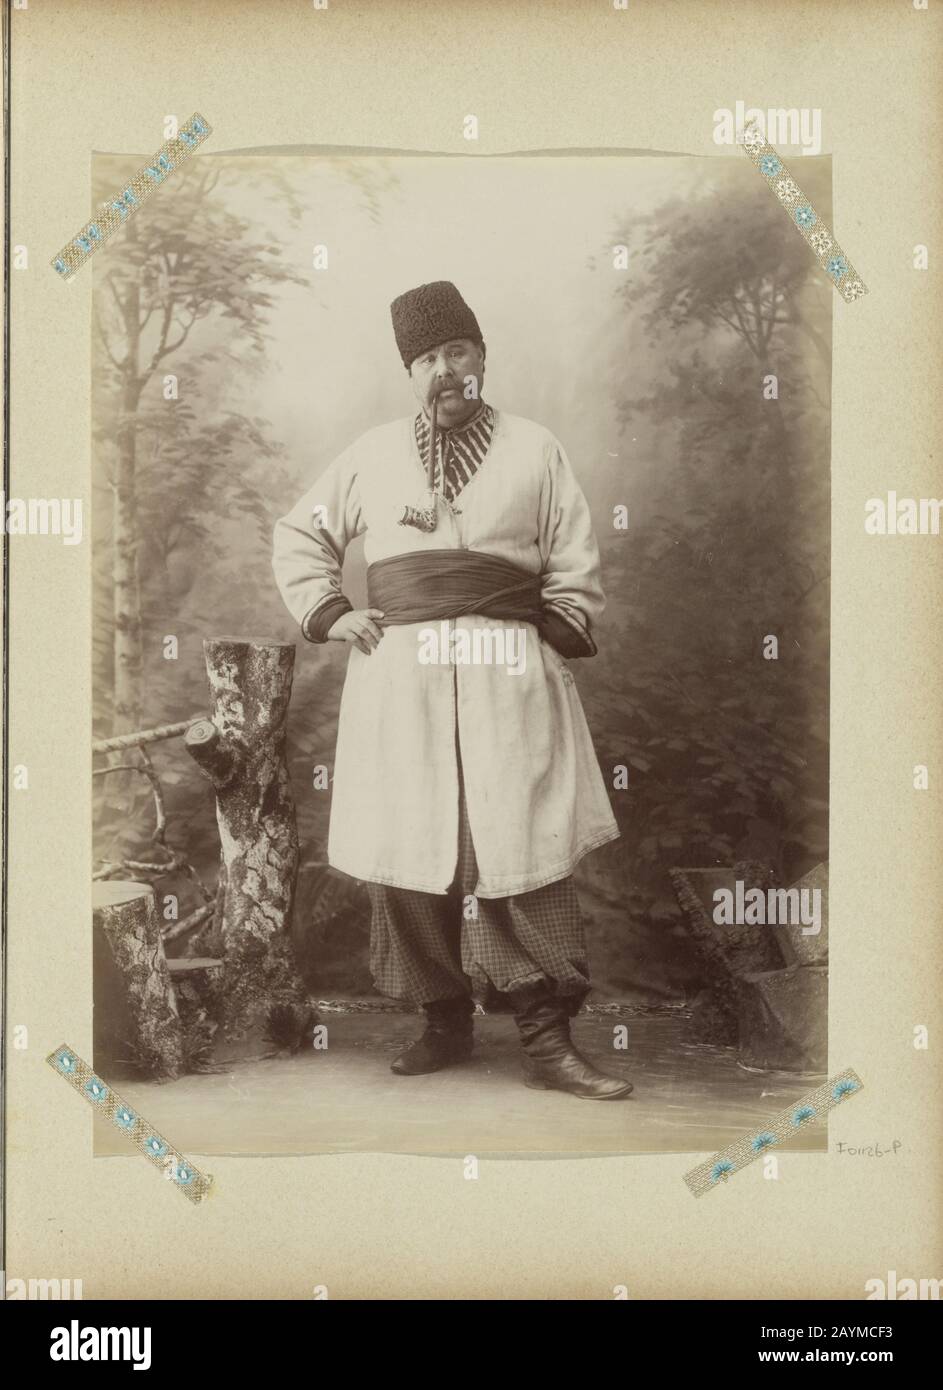 Portrait of an unknown Russian man with fur hat and pipe, anonymous, c. 1890  - c. 1900.jpg - 2AYMCF3 Stock Photo - Alamy